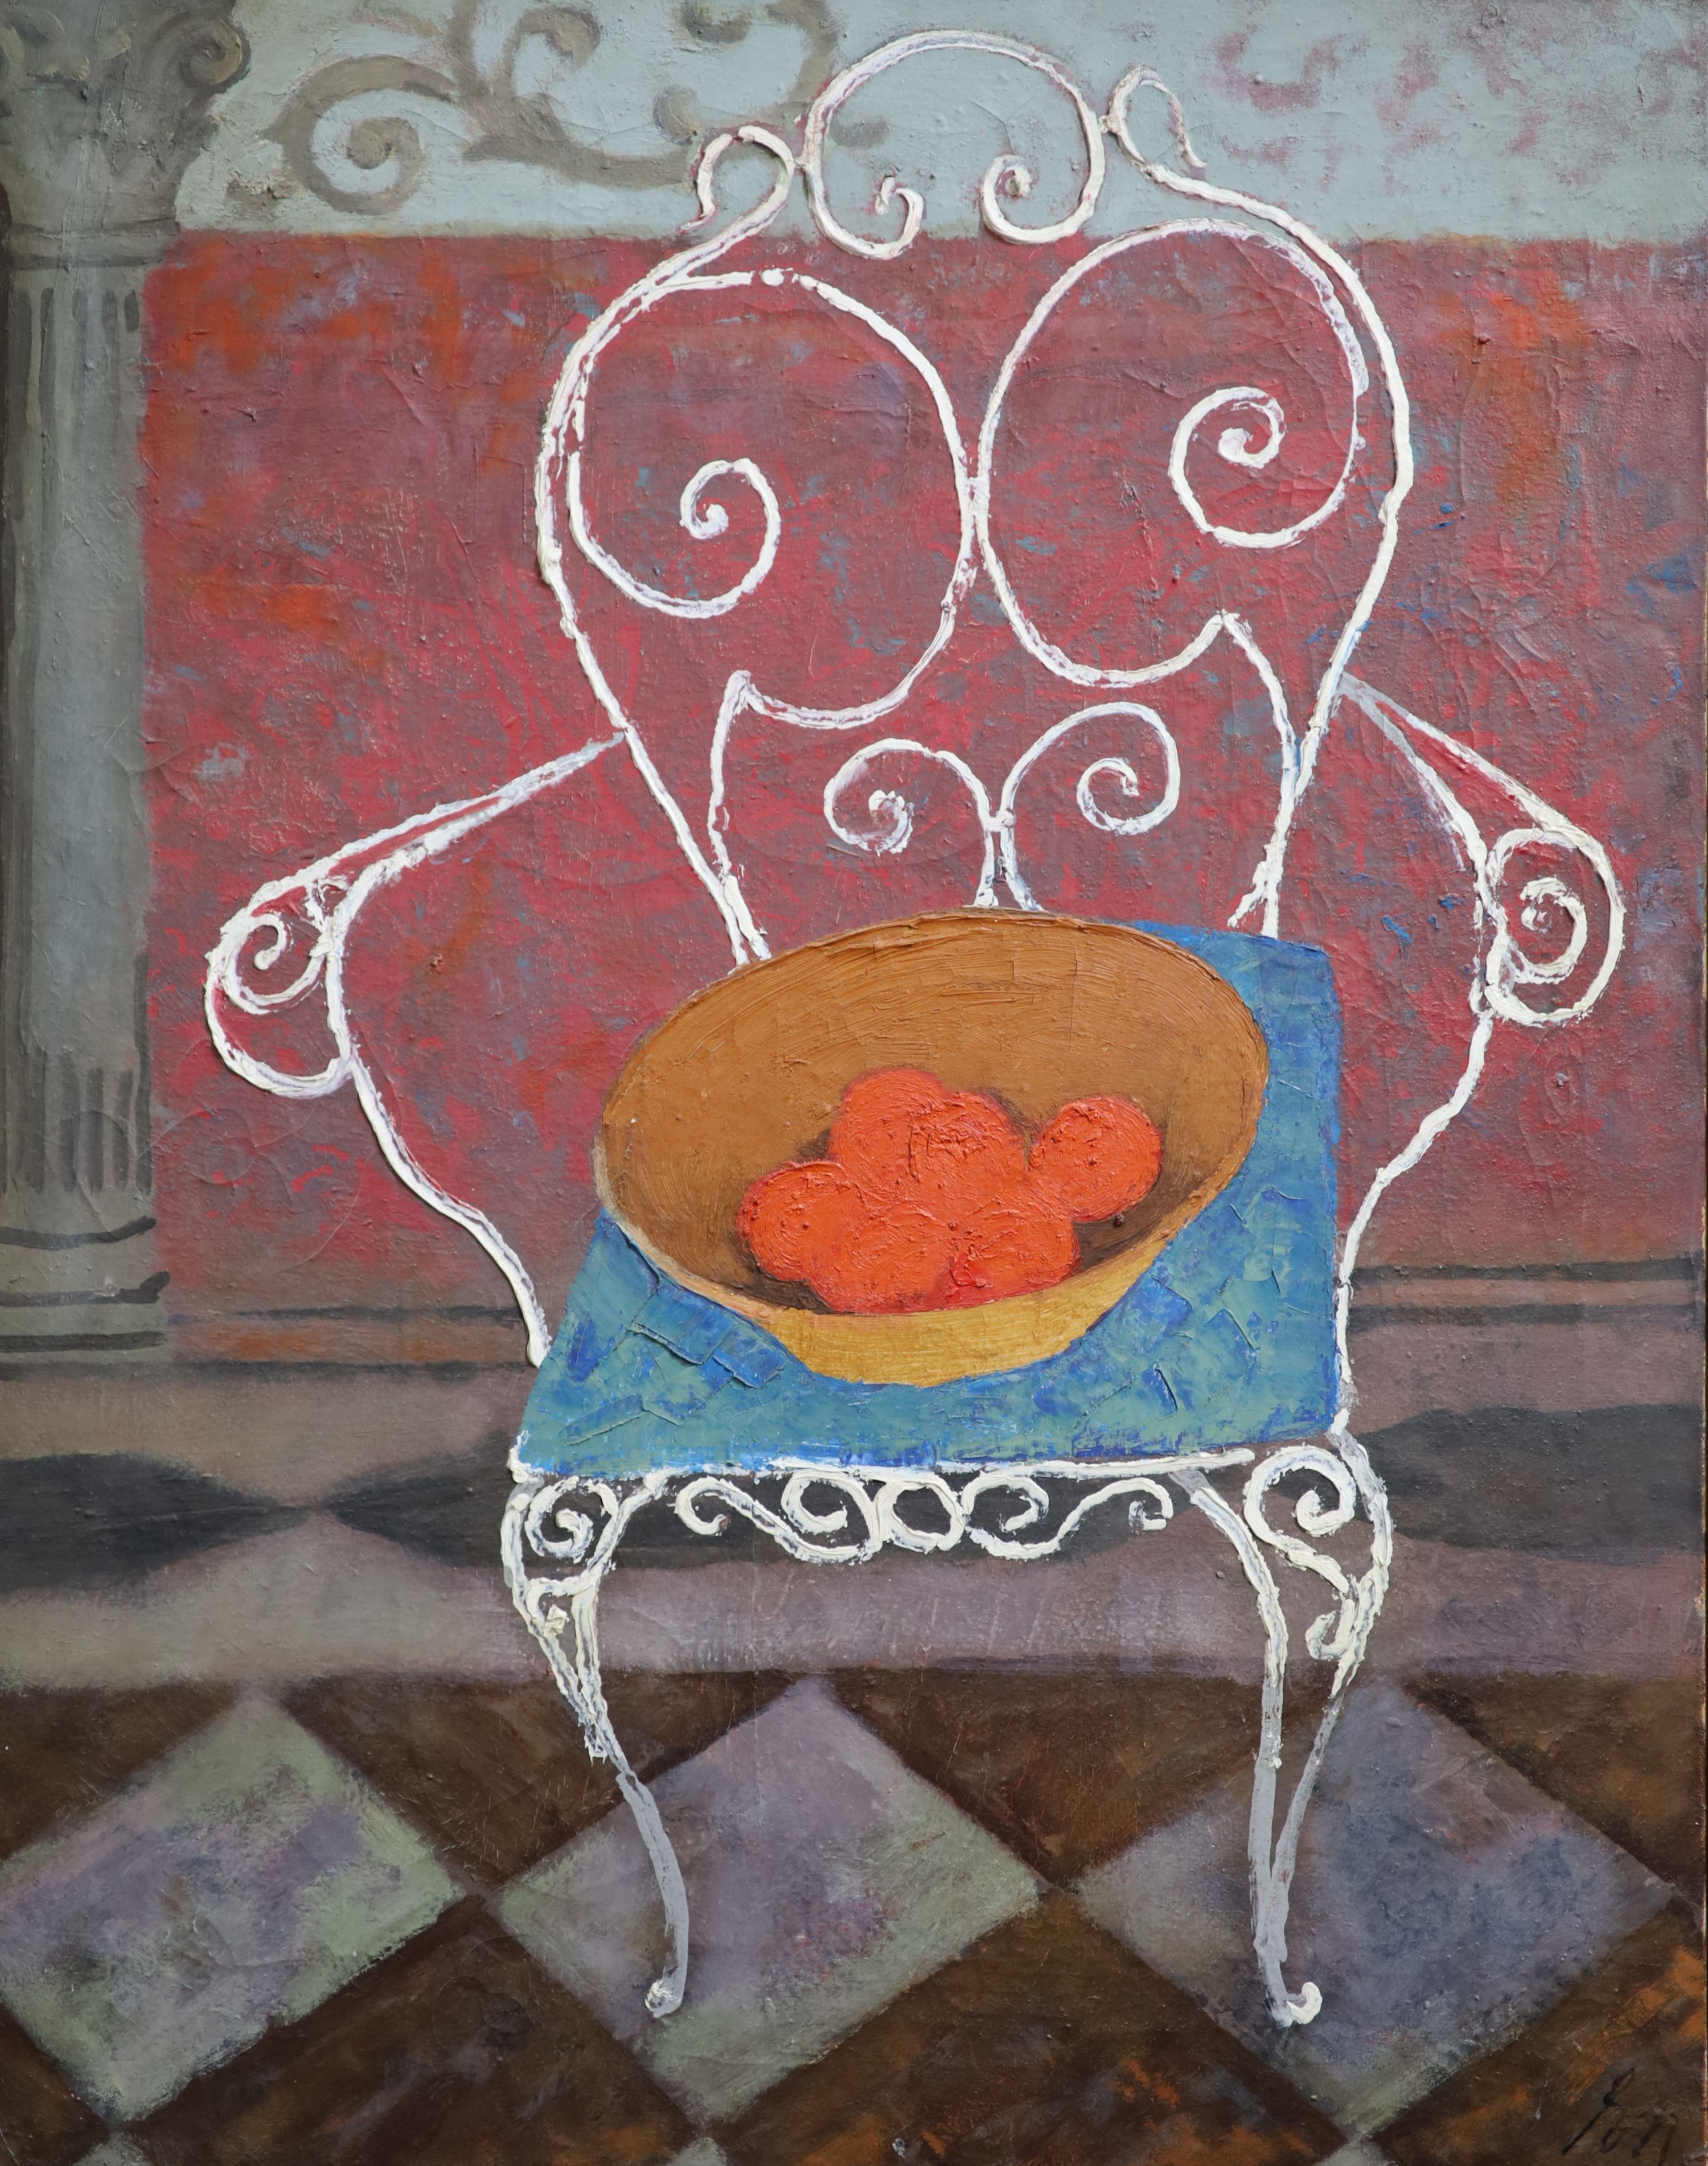 Ernst Neuschul (Austrian, 1895-1968), Still life of oranges upon a wrought iron chair, oil on canvas, 91 x 76cm